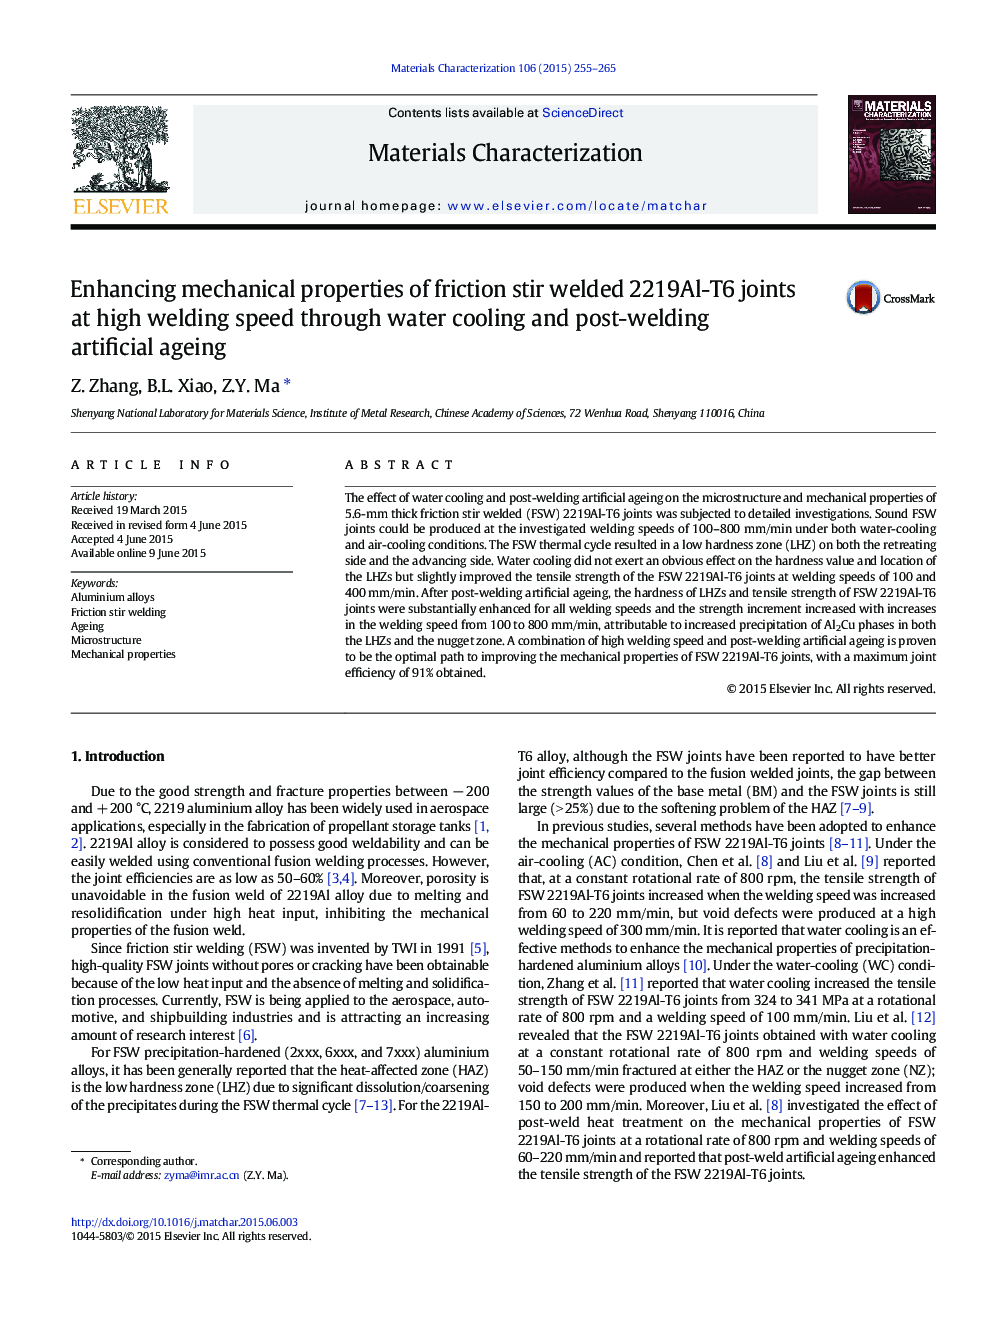 Enhancing mechanical properties of friction stir welded 2219Al-T6 joints at high welding speed through water cooling and post-welding artificial ageing